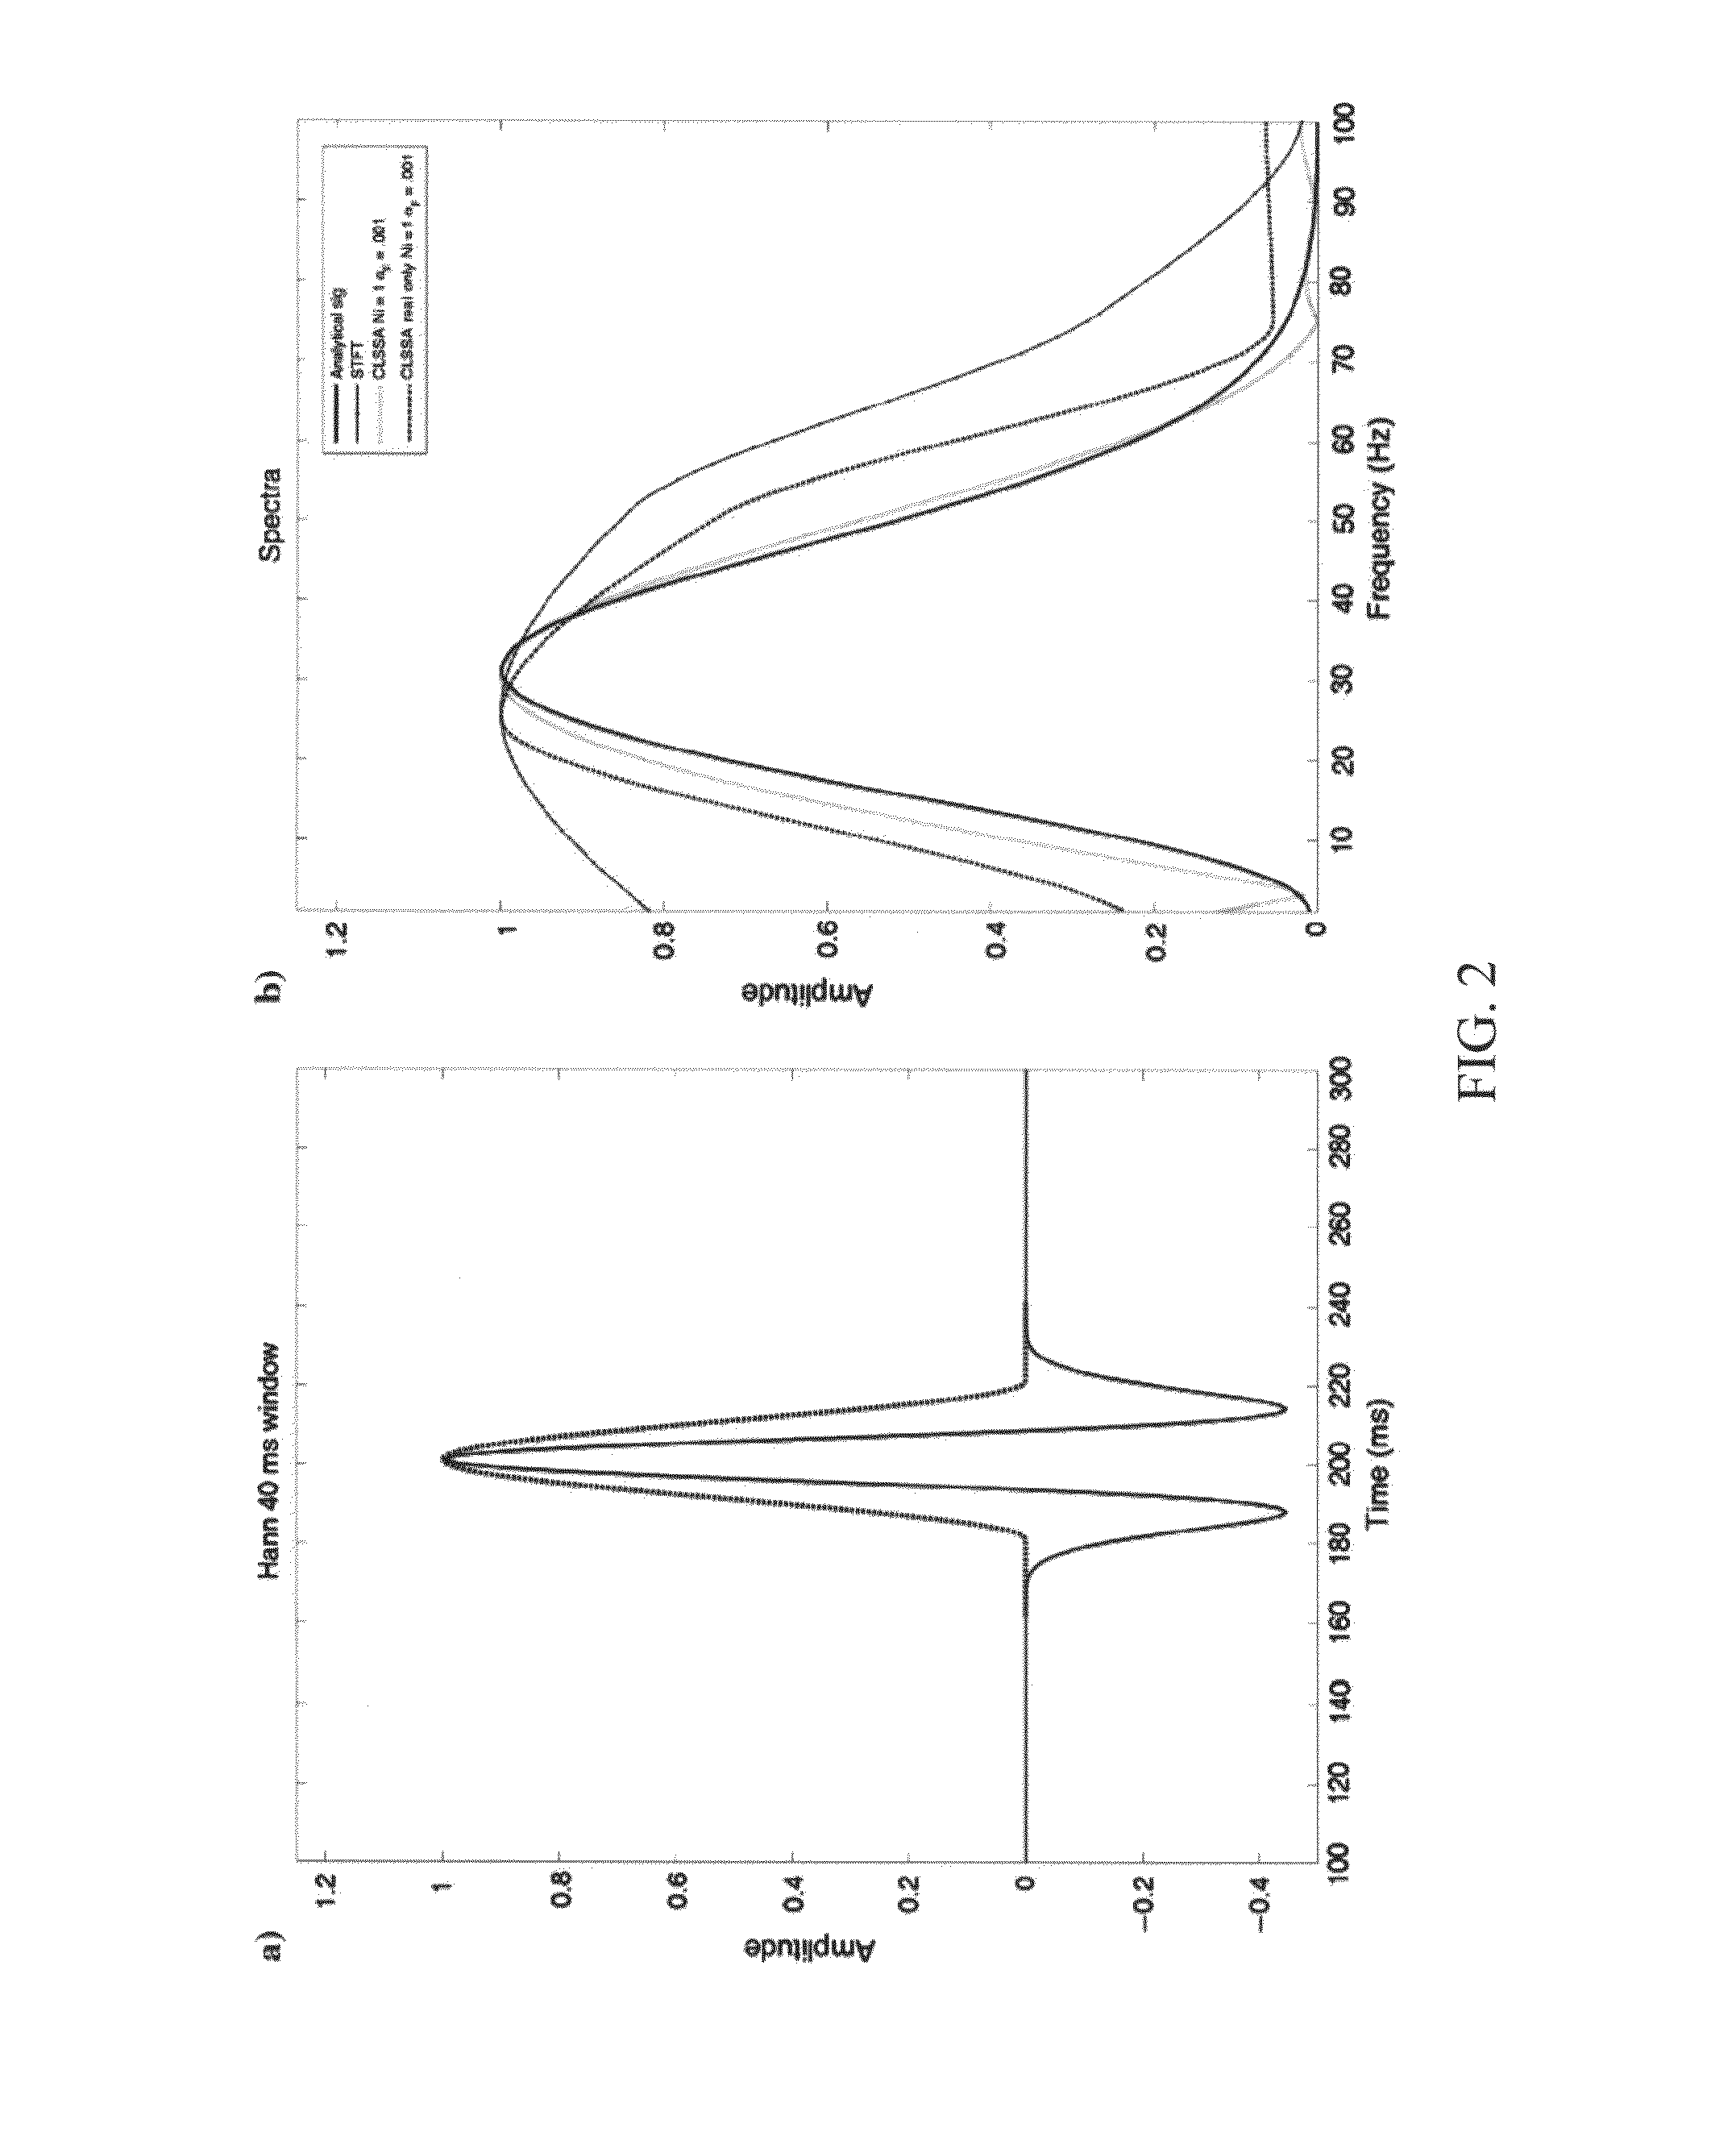 System and method for constrained least-squares spectral processing and analysis of seismic data